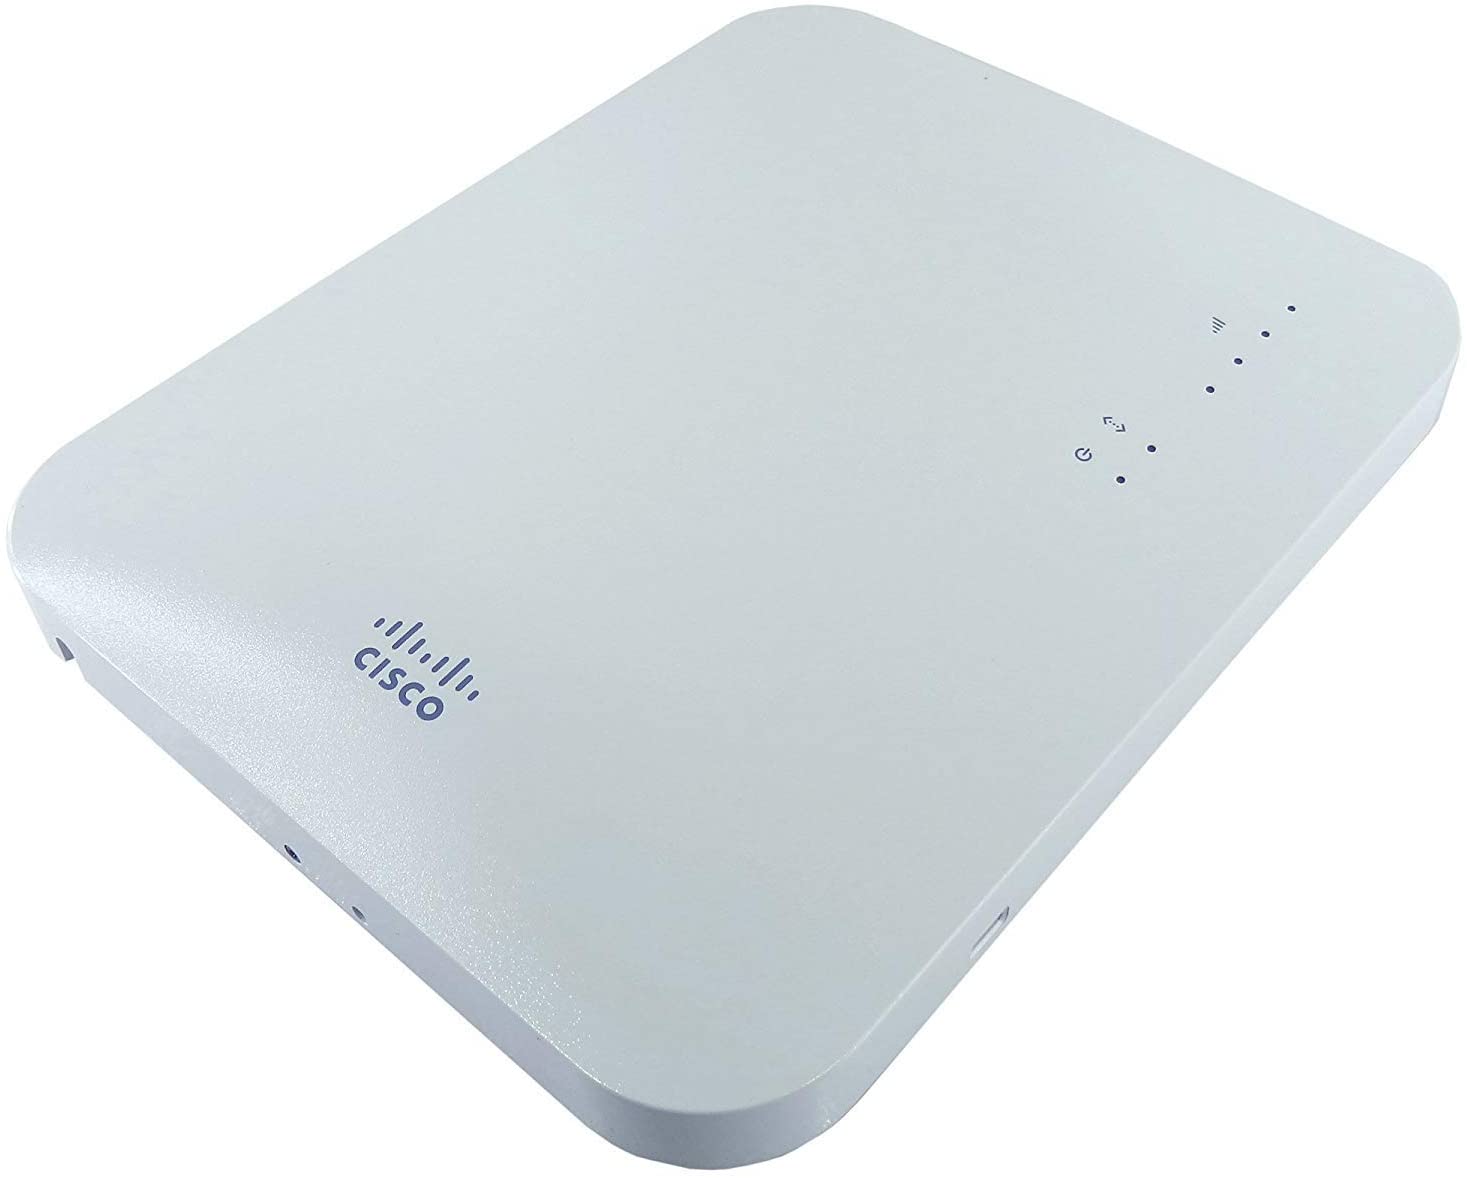 A photo of the Cisco MR16 Dual-Radio 802.11n PoE Cloud Managed Access Point